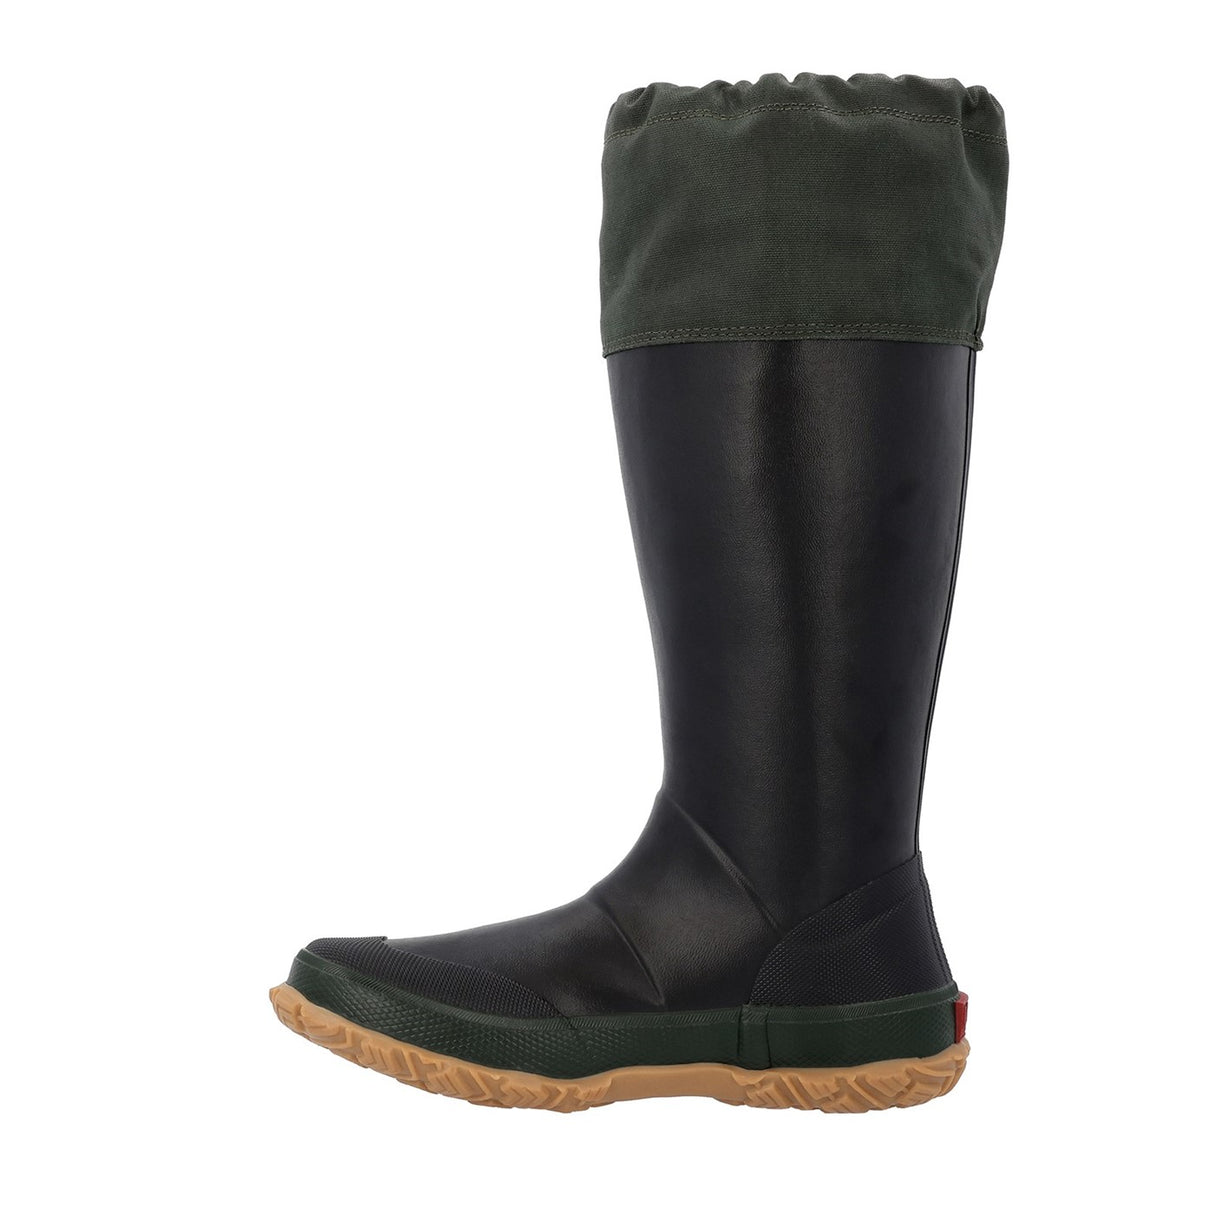 Unisex Forager Tall Boots Black Moss Green Waxed Canvas